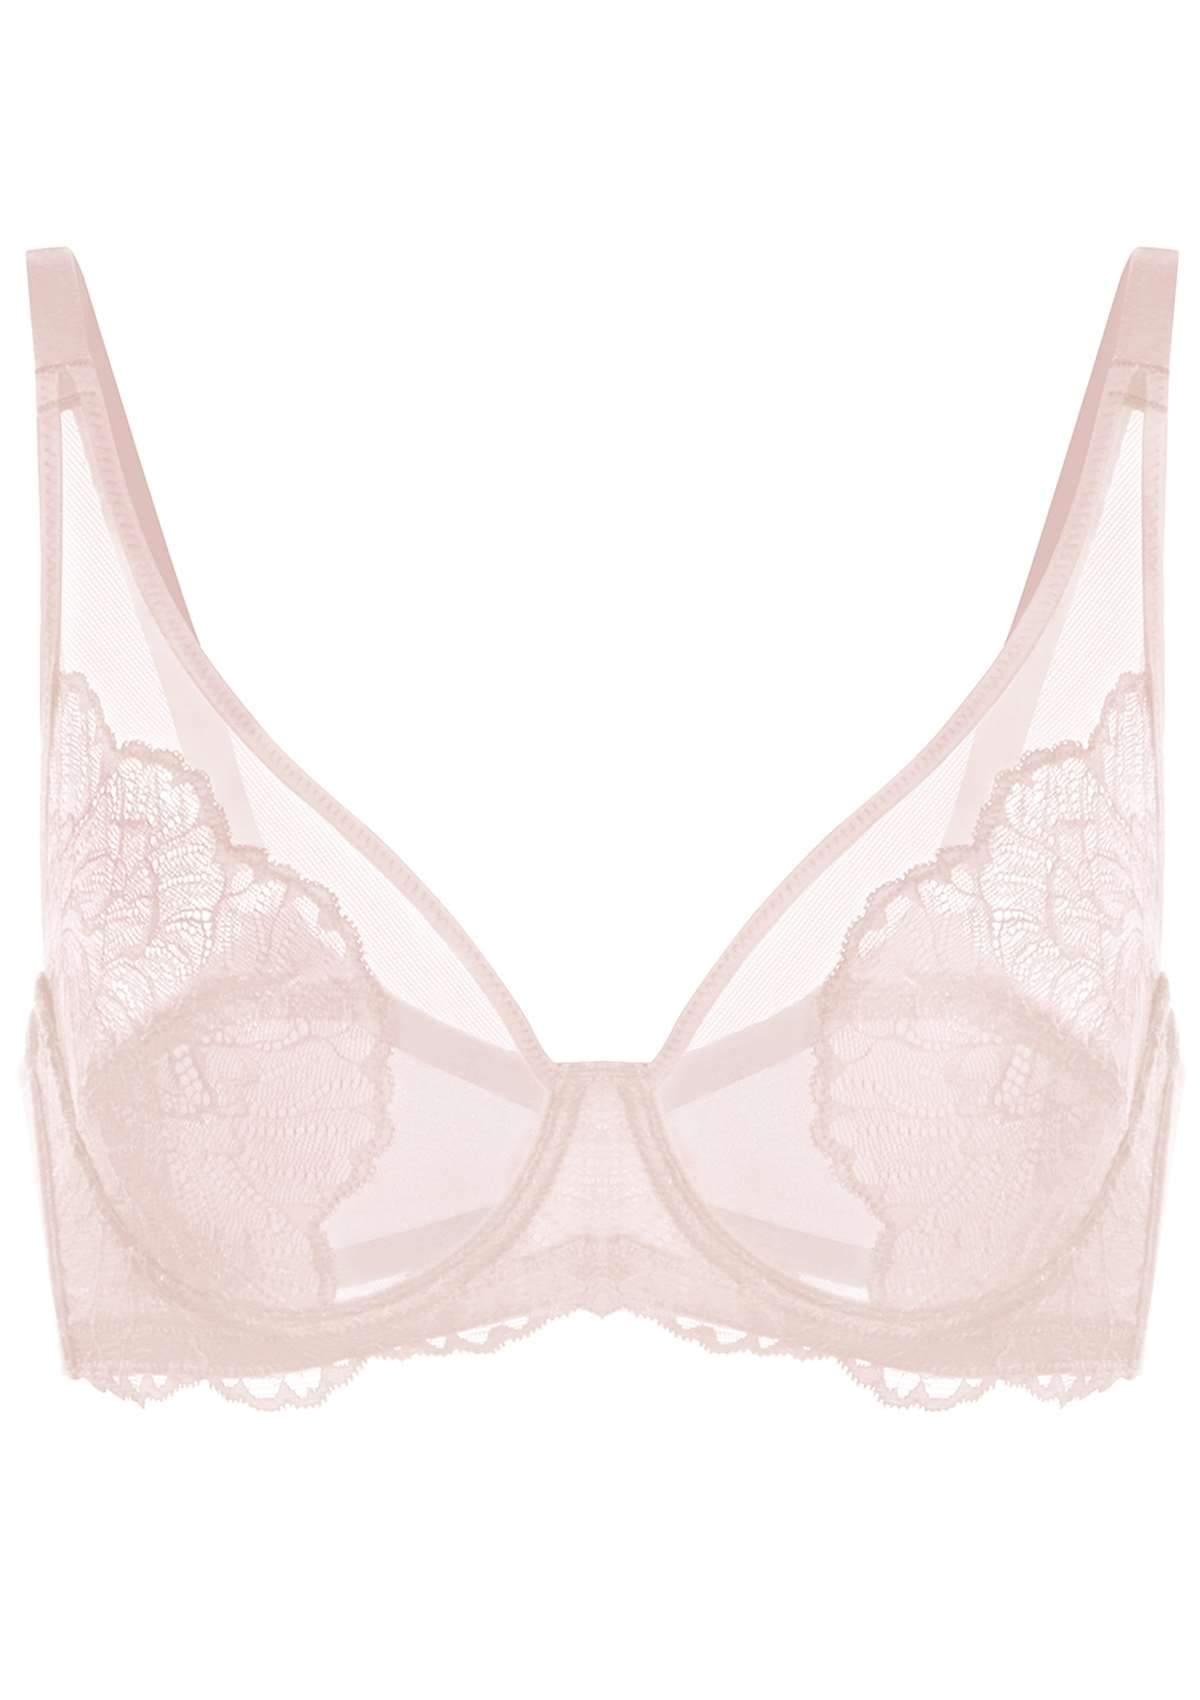 HSIA Blossom Lace Bra And Panties Set: Best Bra For Large Busts - Dark Pink / 36 / D